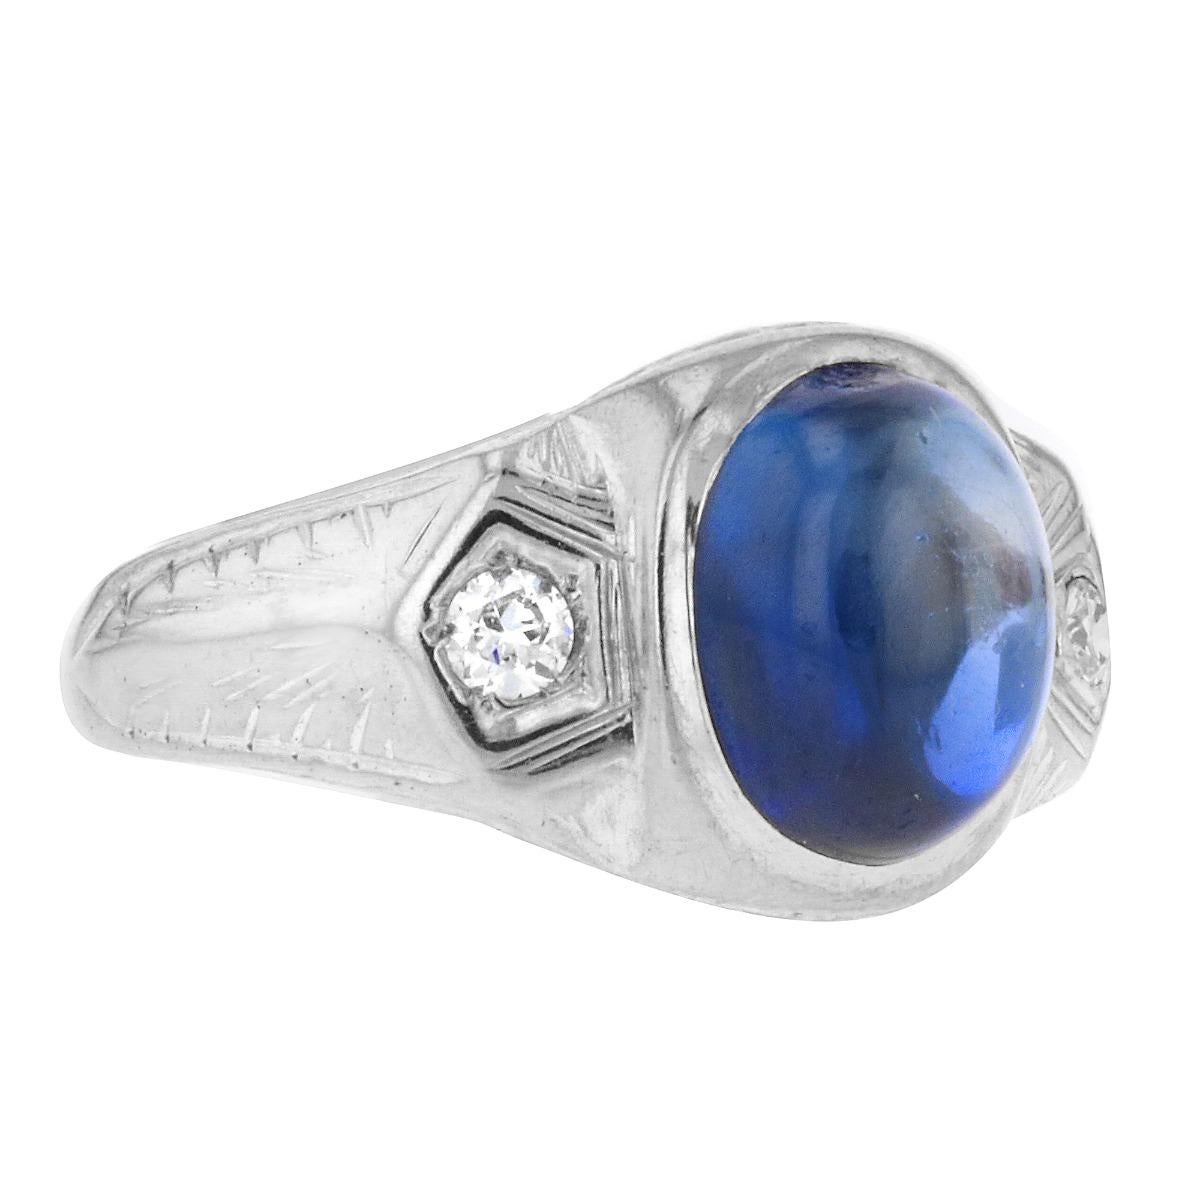 14K White Gold Sapphire and White Diamond Ring
5.30 Penny Weight

Ring Size: 8
Center Stone: Yes
Gemstone: Sapphire and White Diamond
Stone Count: 2 Diamond
Stone Shape: Oval 
Color Grade: G-H
Clarity Grade: SI1-SI2
Polish: Very Good
Symmetry: Very